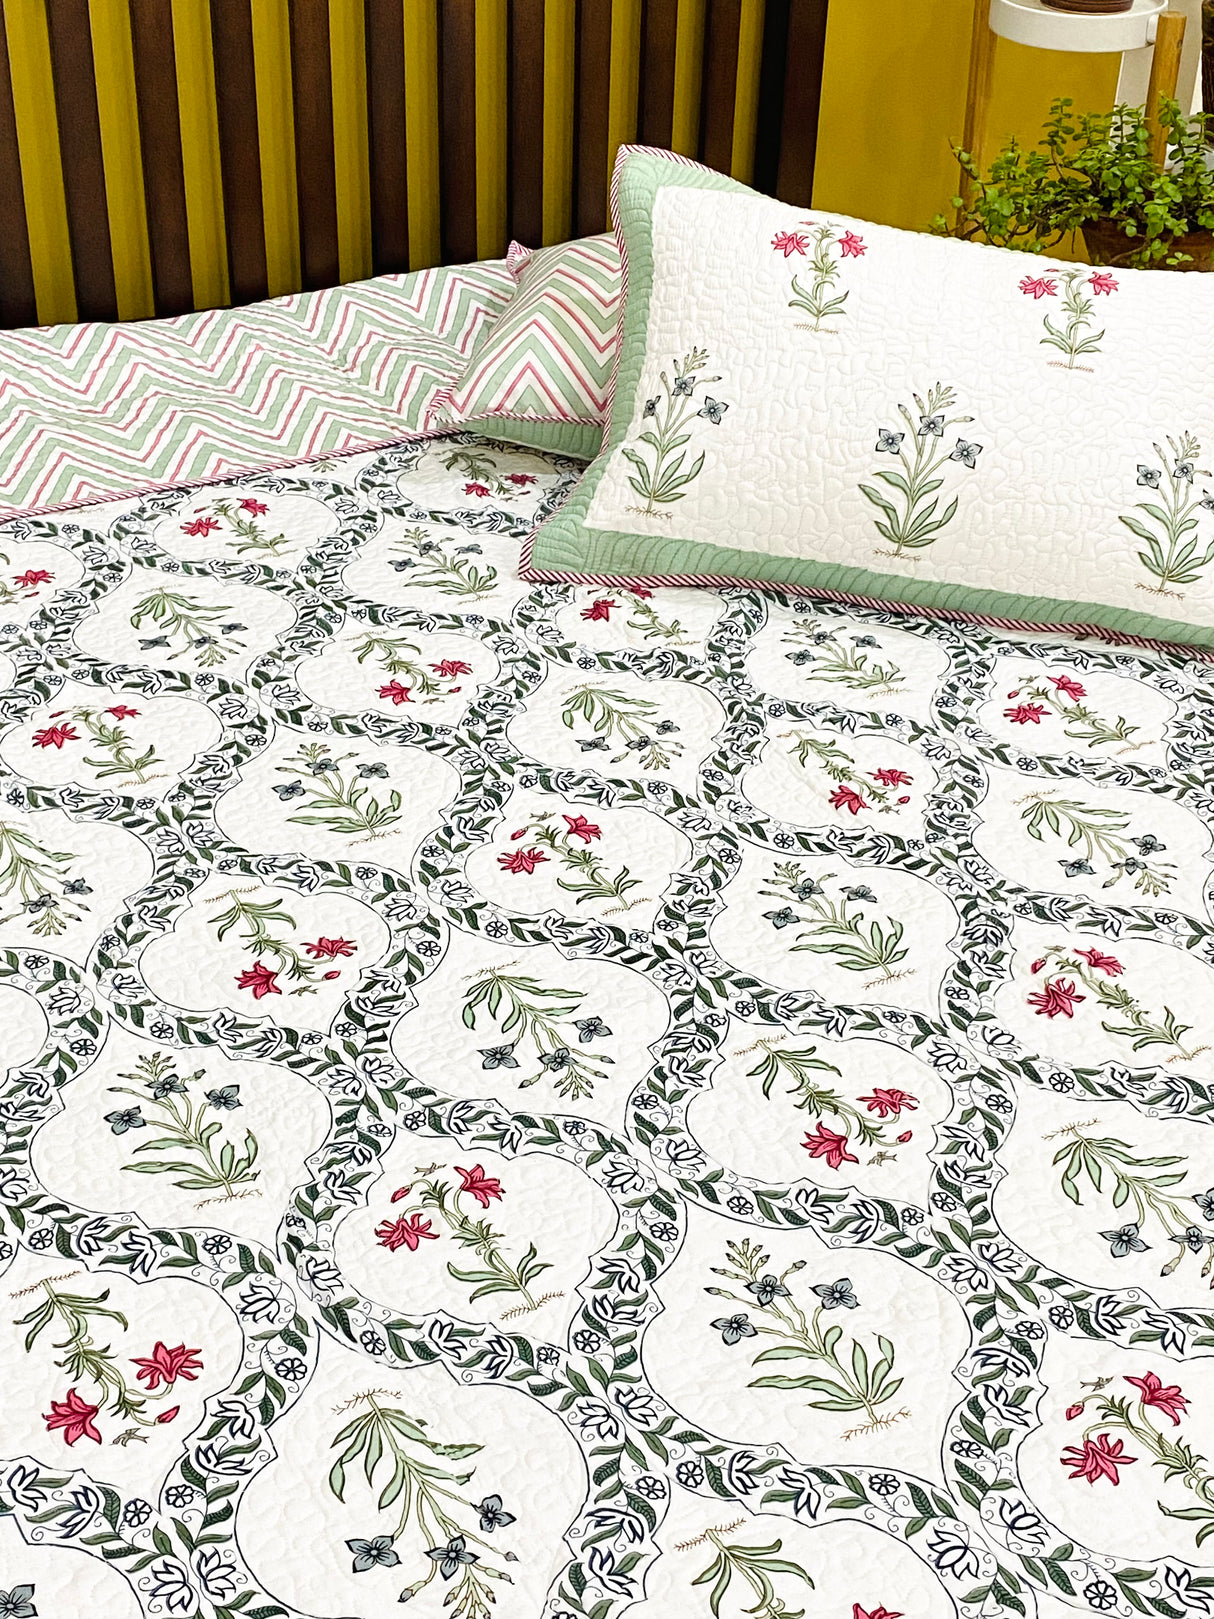 Quilted Blockprint REVERSIBLE Mulmul Bedcover